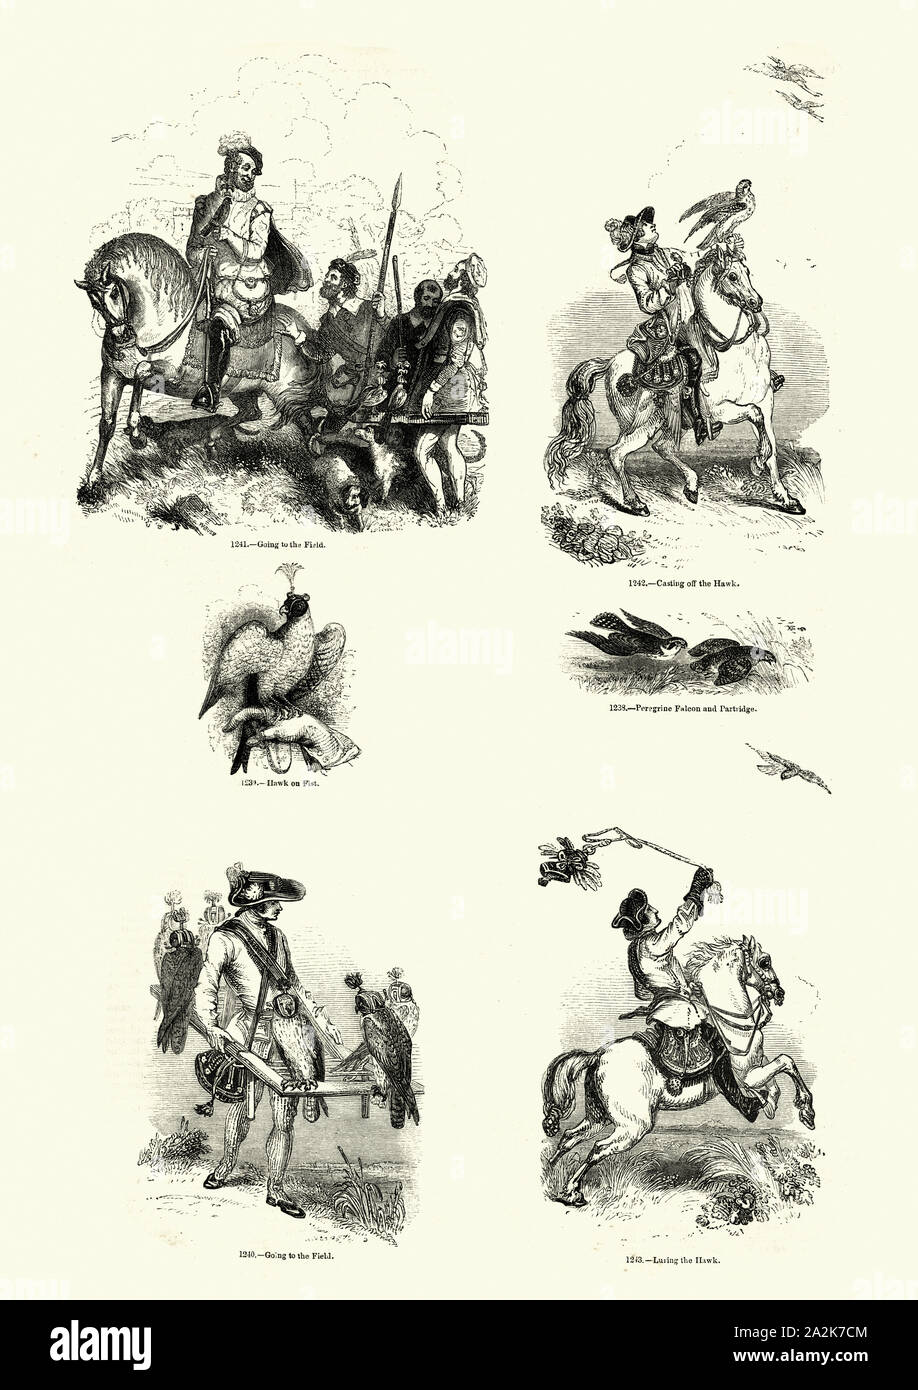 Vintage engraving of History of Falconry, Falconers hunting with hawks, 18th Century Stock Photo